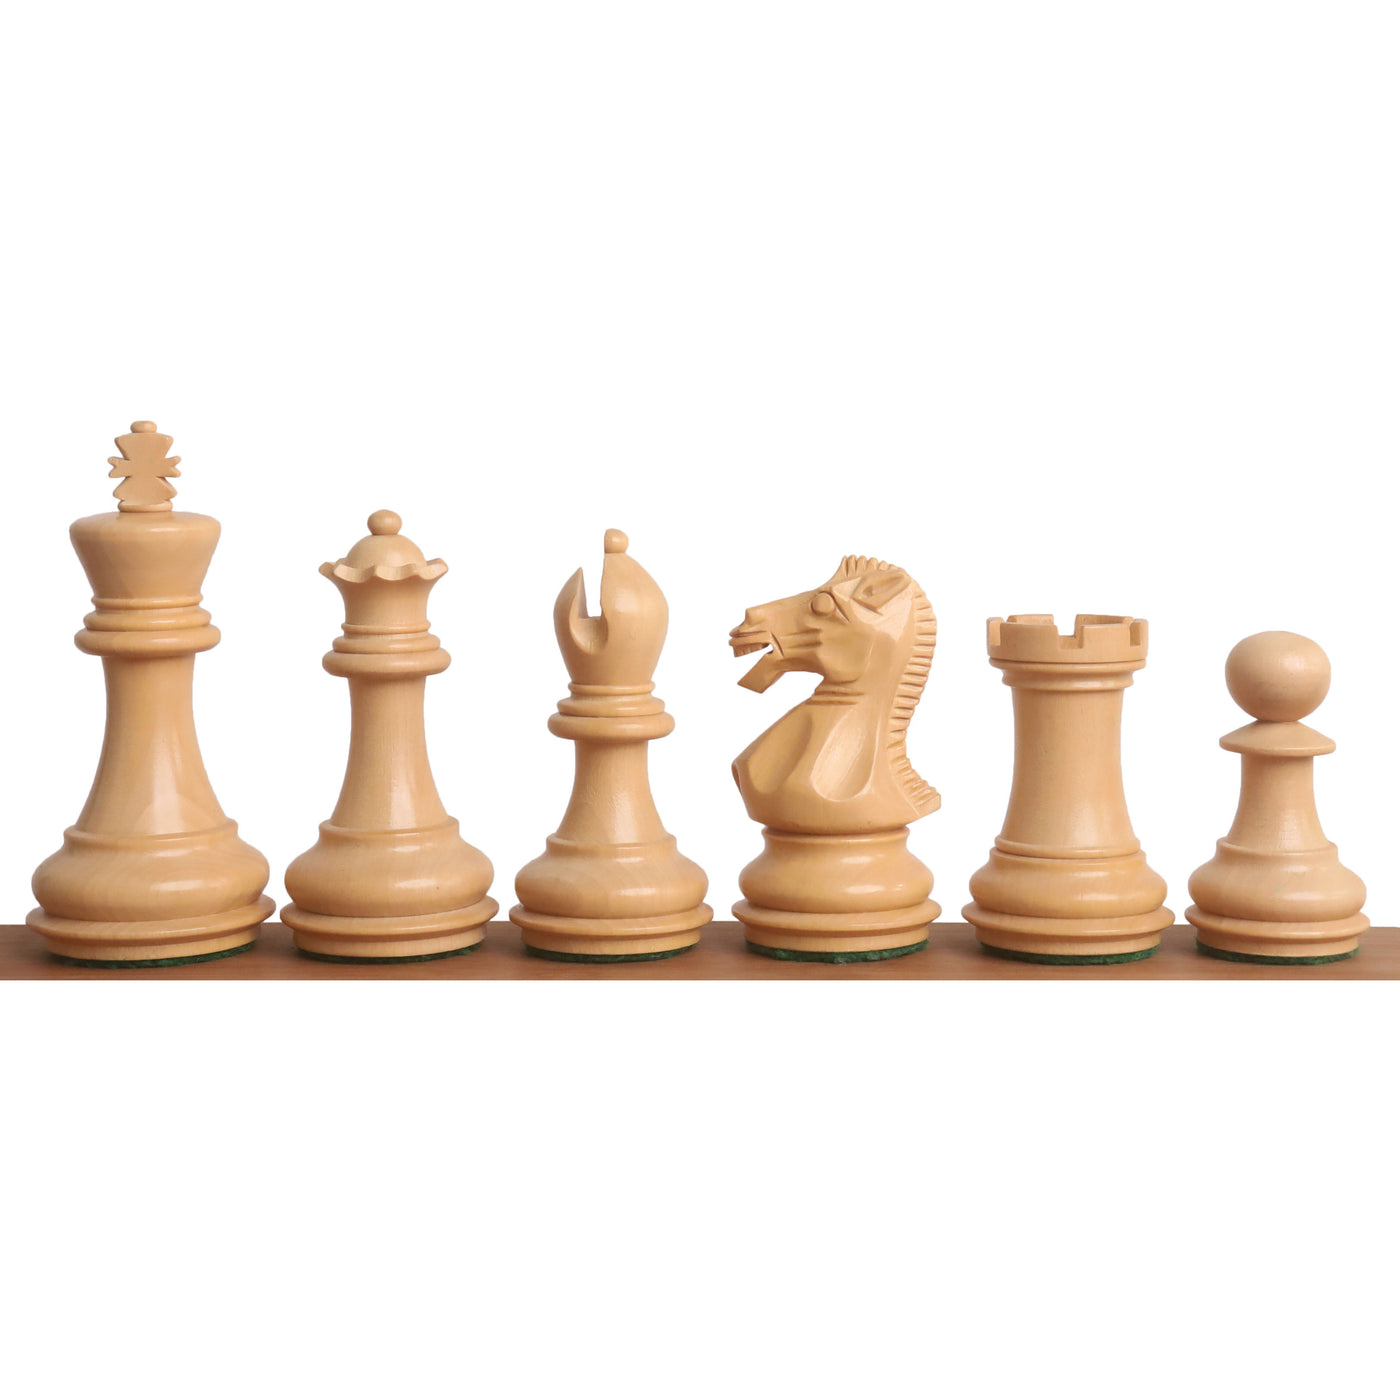 Slightly Imperfect 3.1" Chamfered Base Staunton Chess Set - Chess Pieces Only - Weighted Golden Rosewood